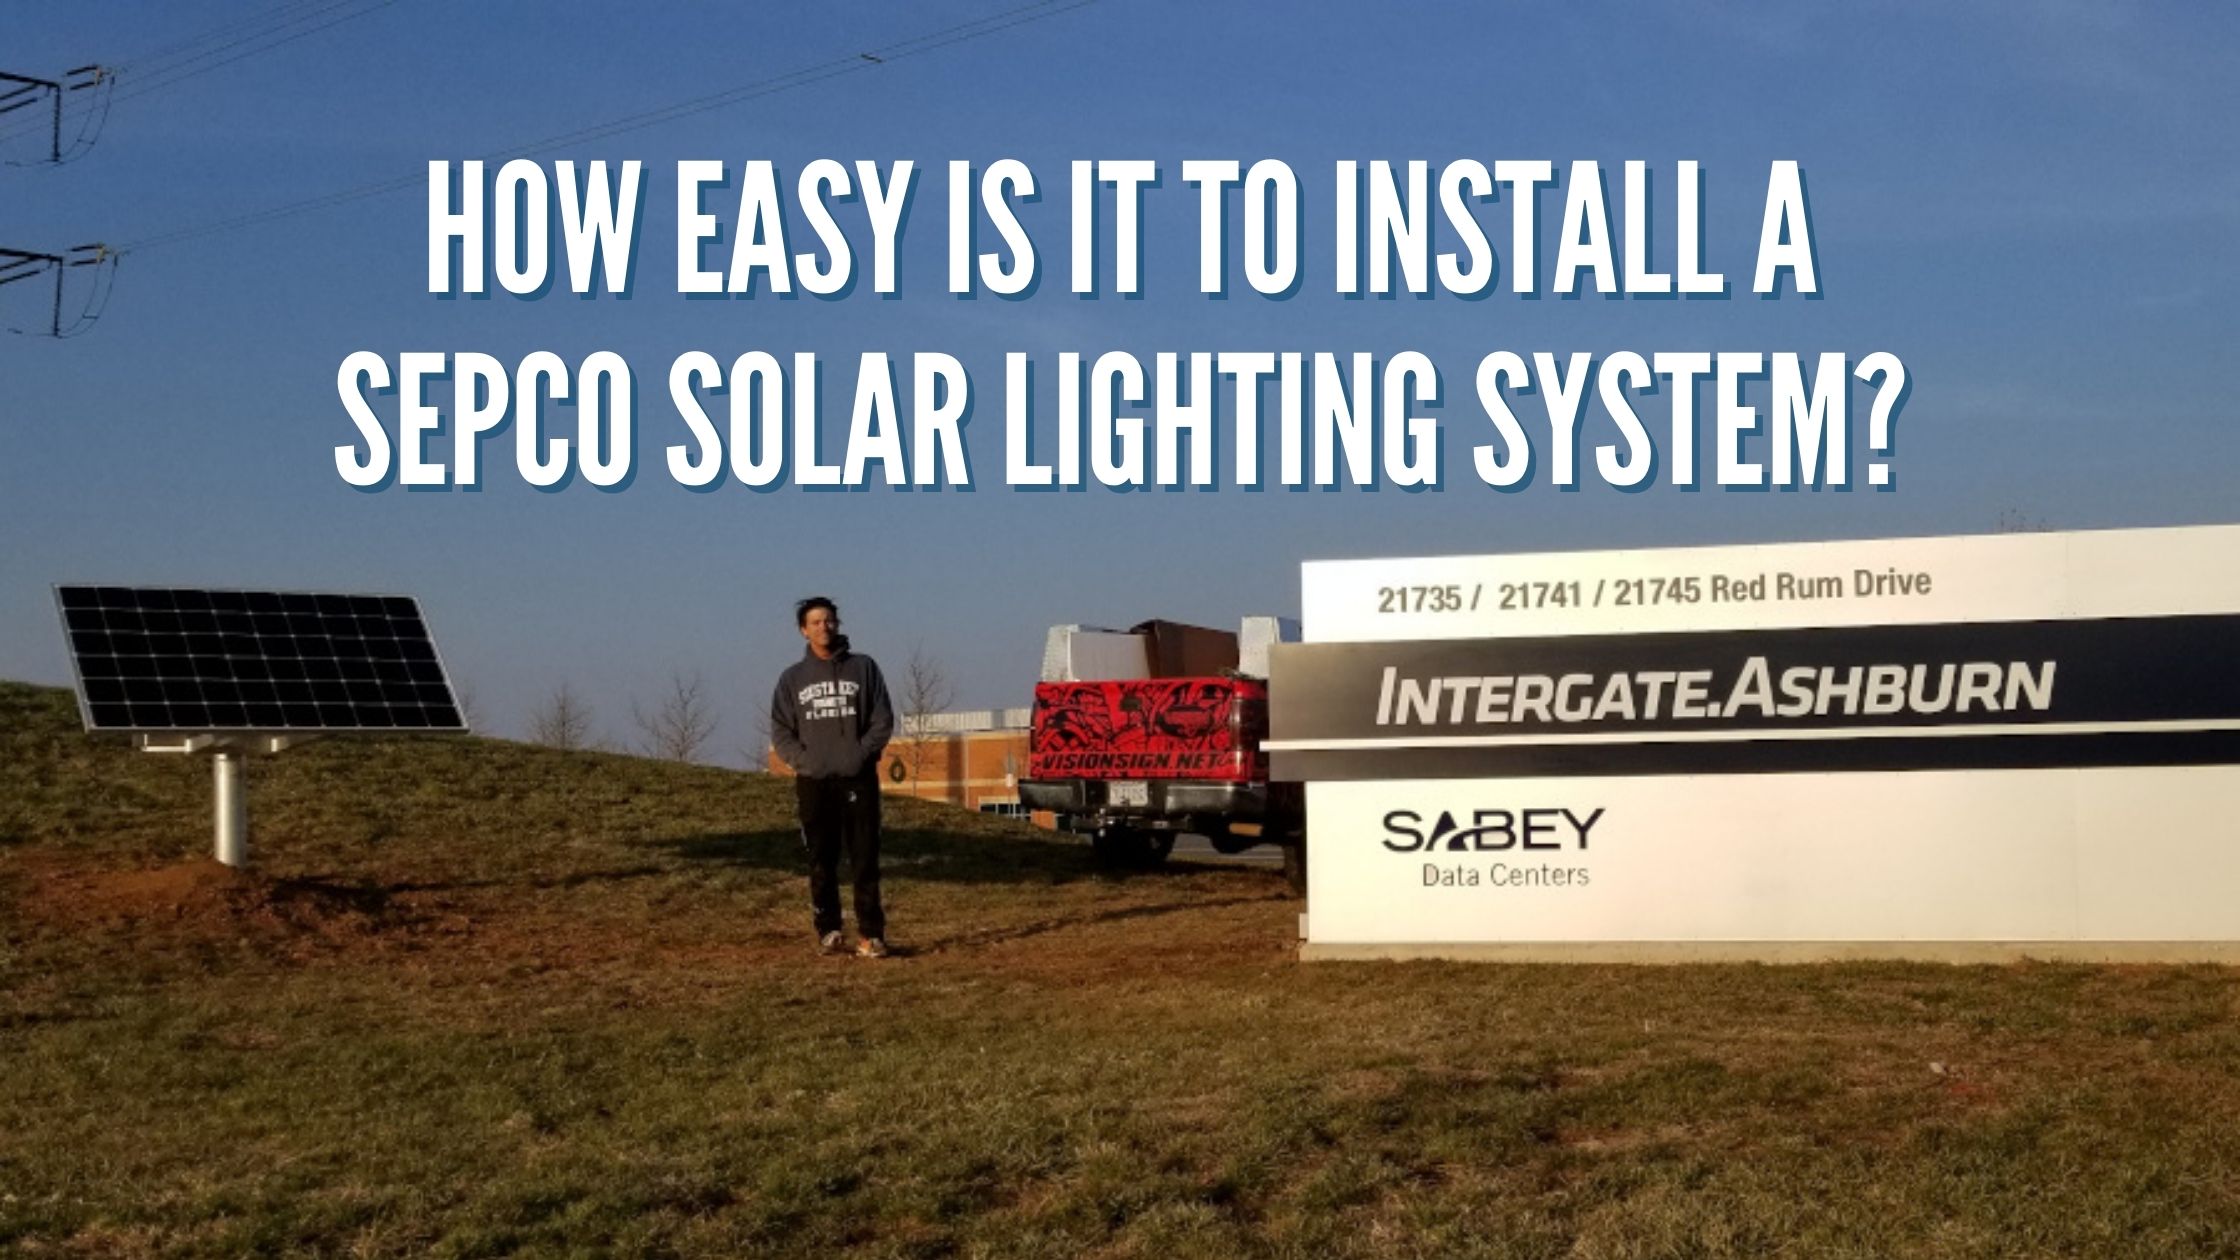 How Easy Is It to Install a SEPCO Solar Lighting System?